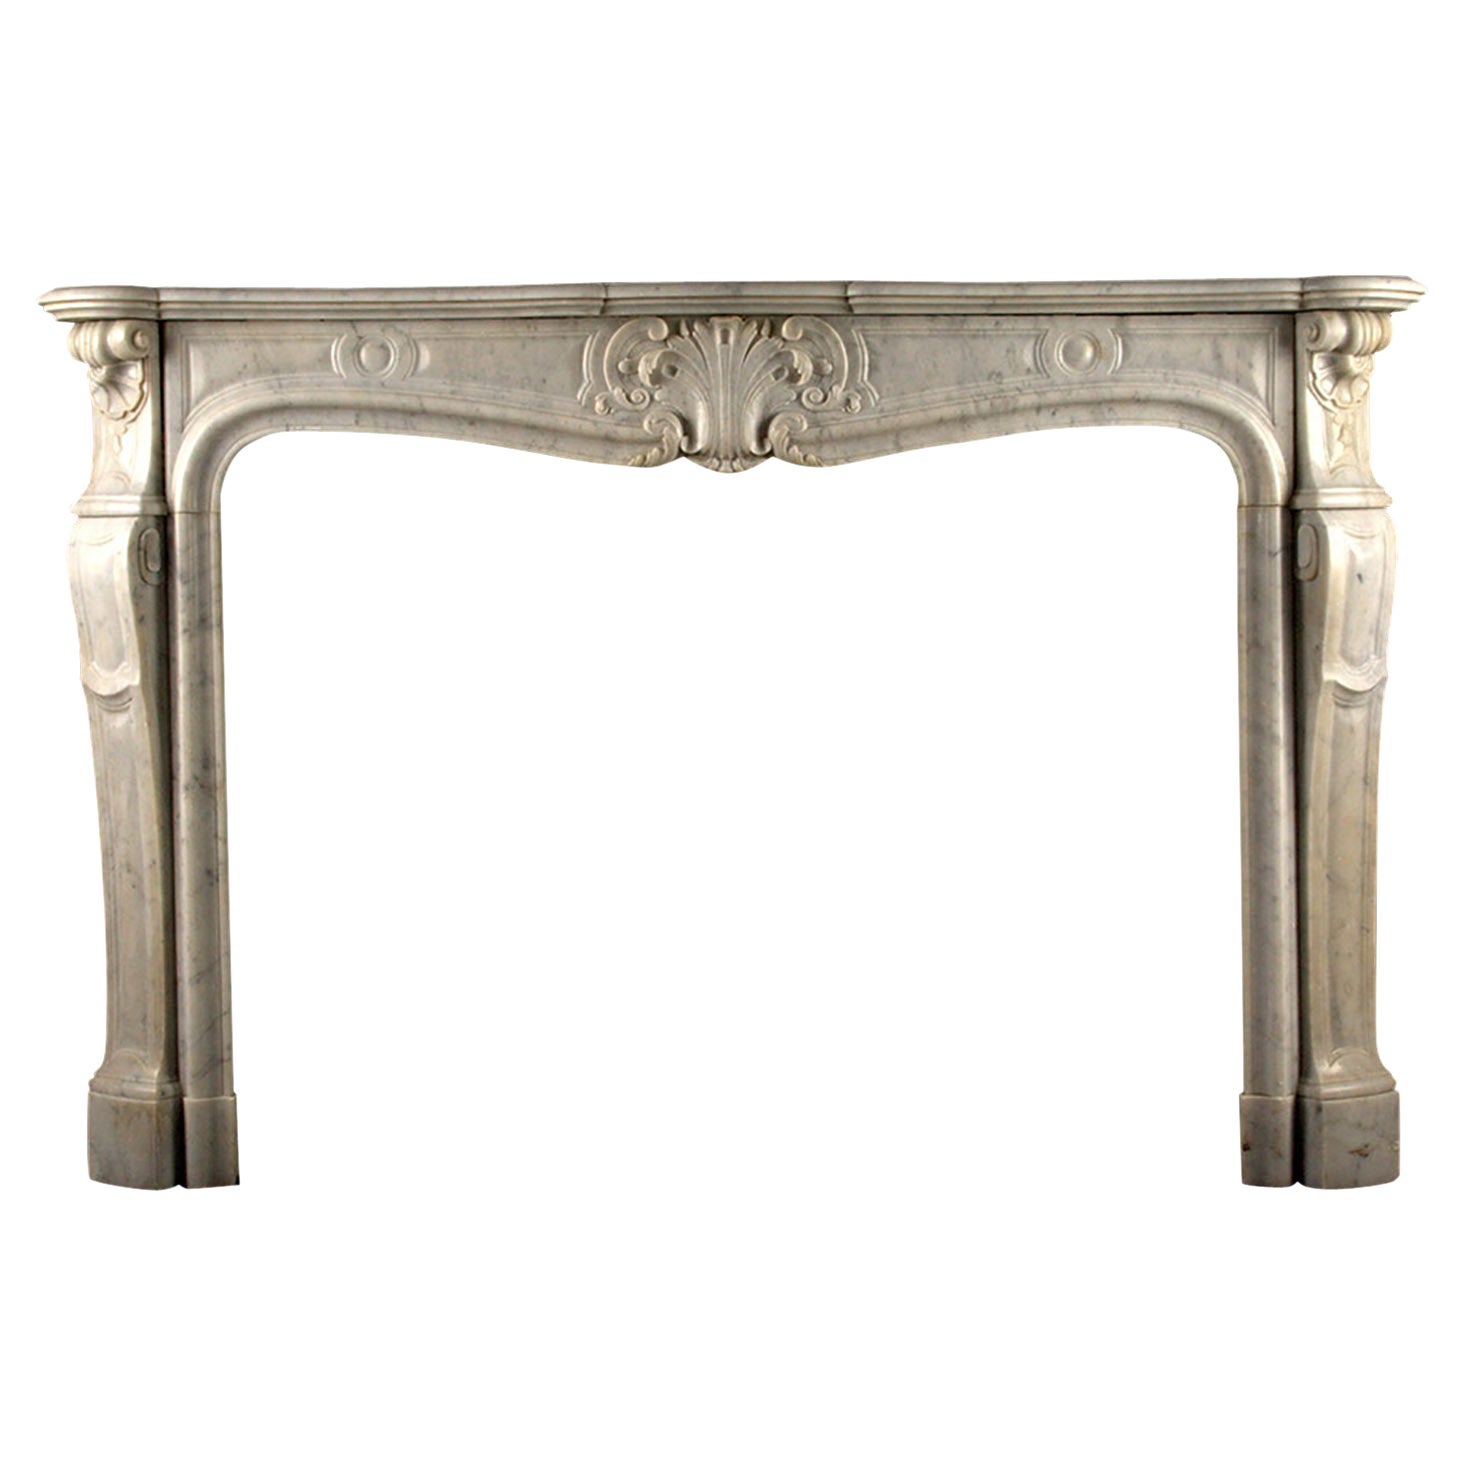 Large Antique Louis XV Fireplace in the Rococo Manner